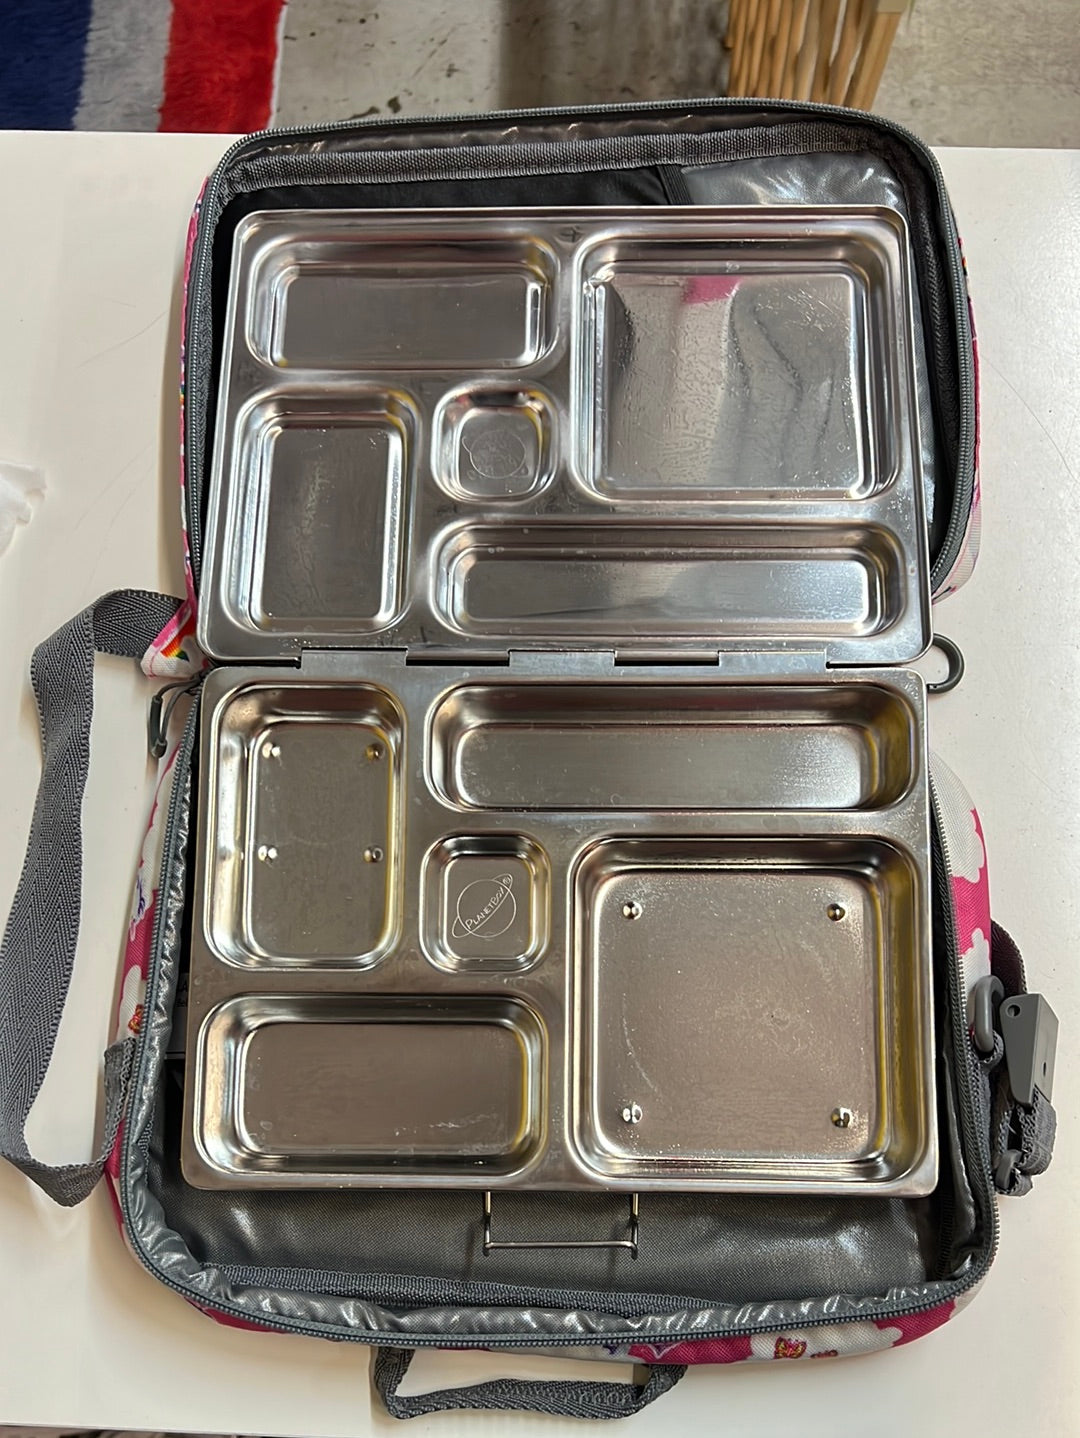 New Planet Box Stainless Steel Lunch Case and Bag